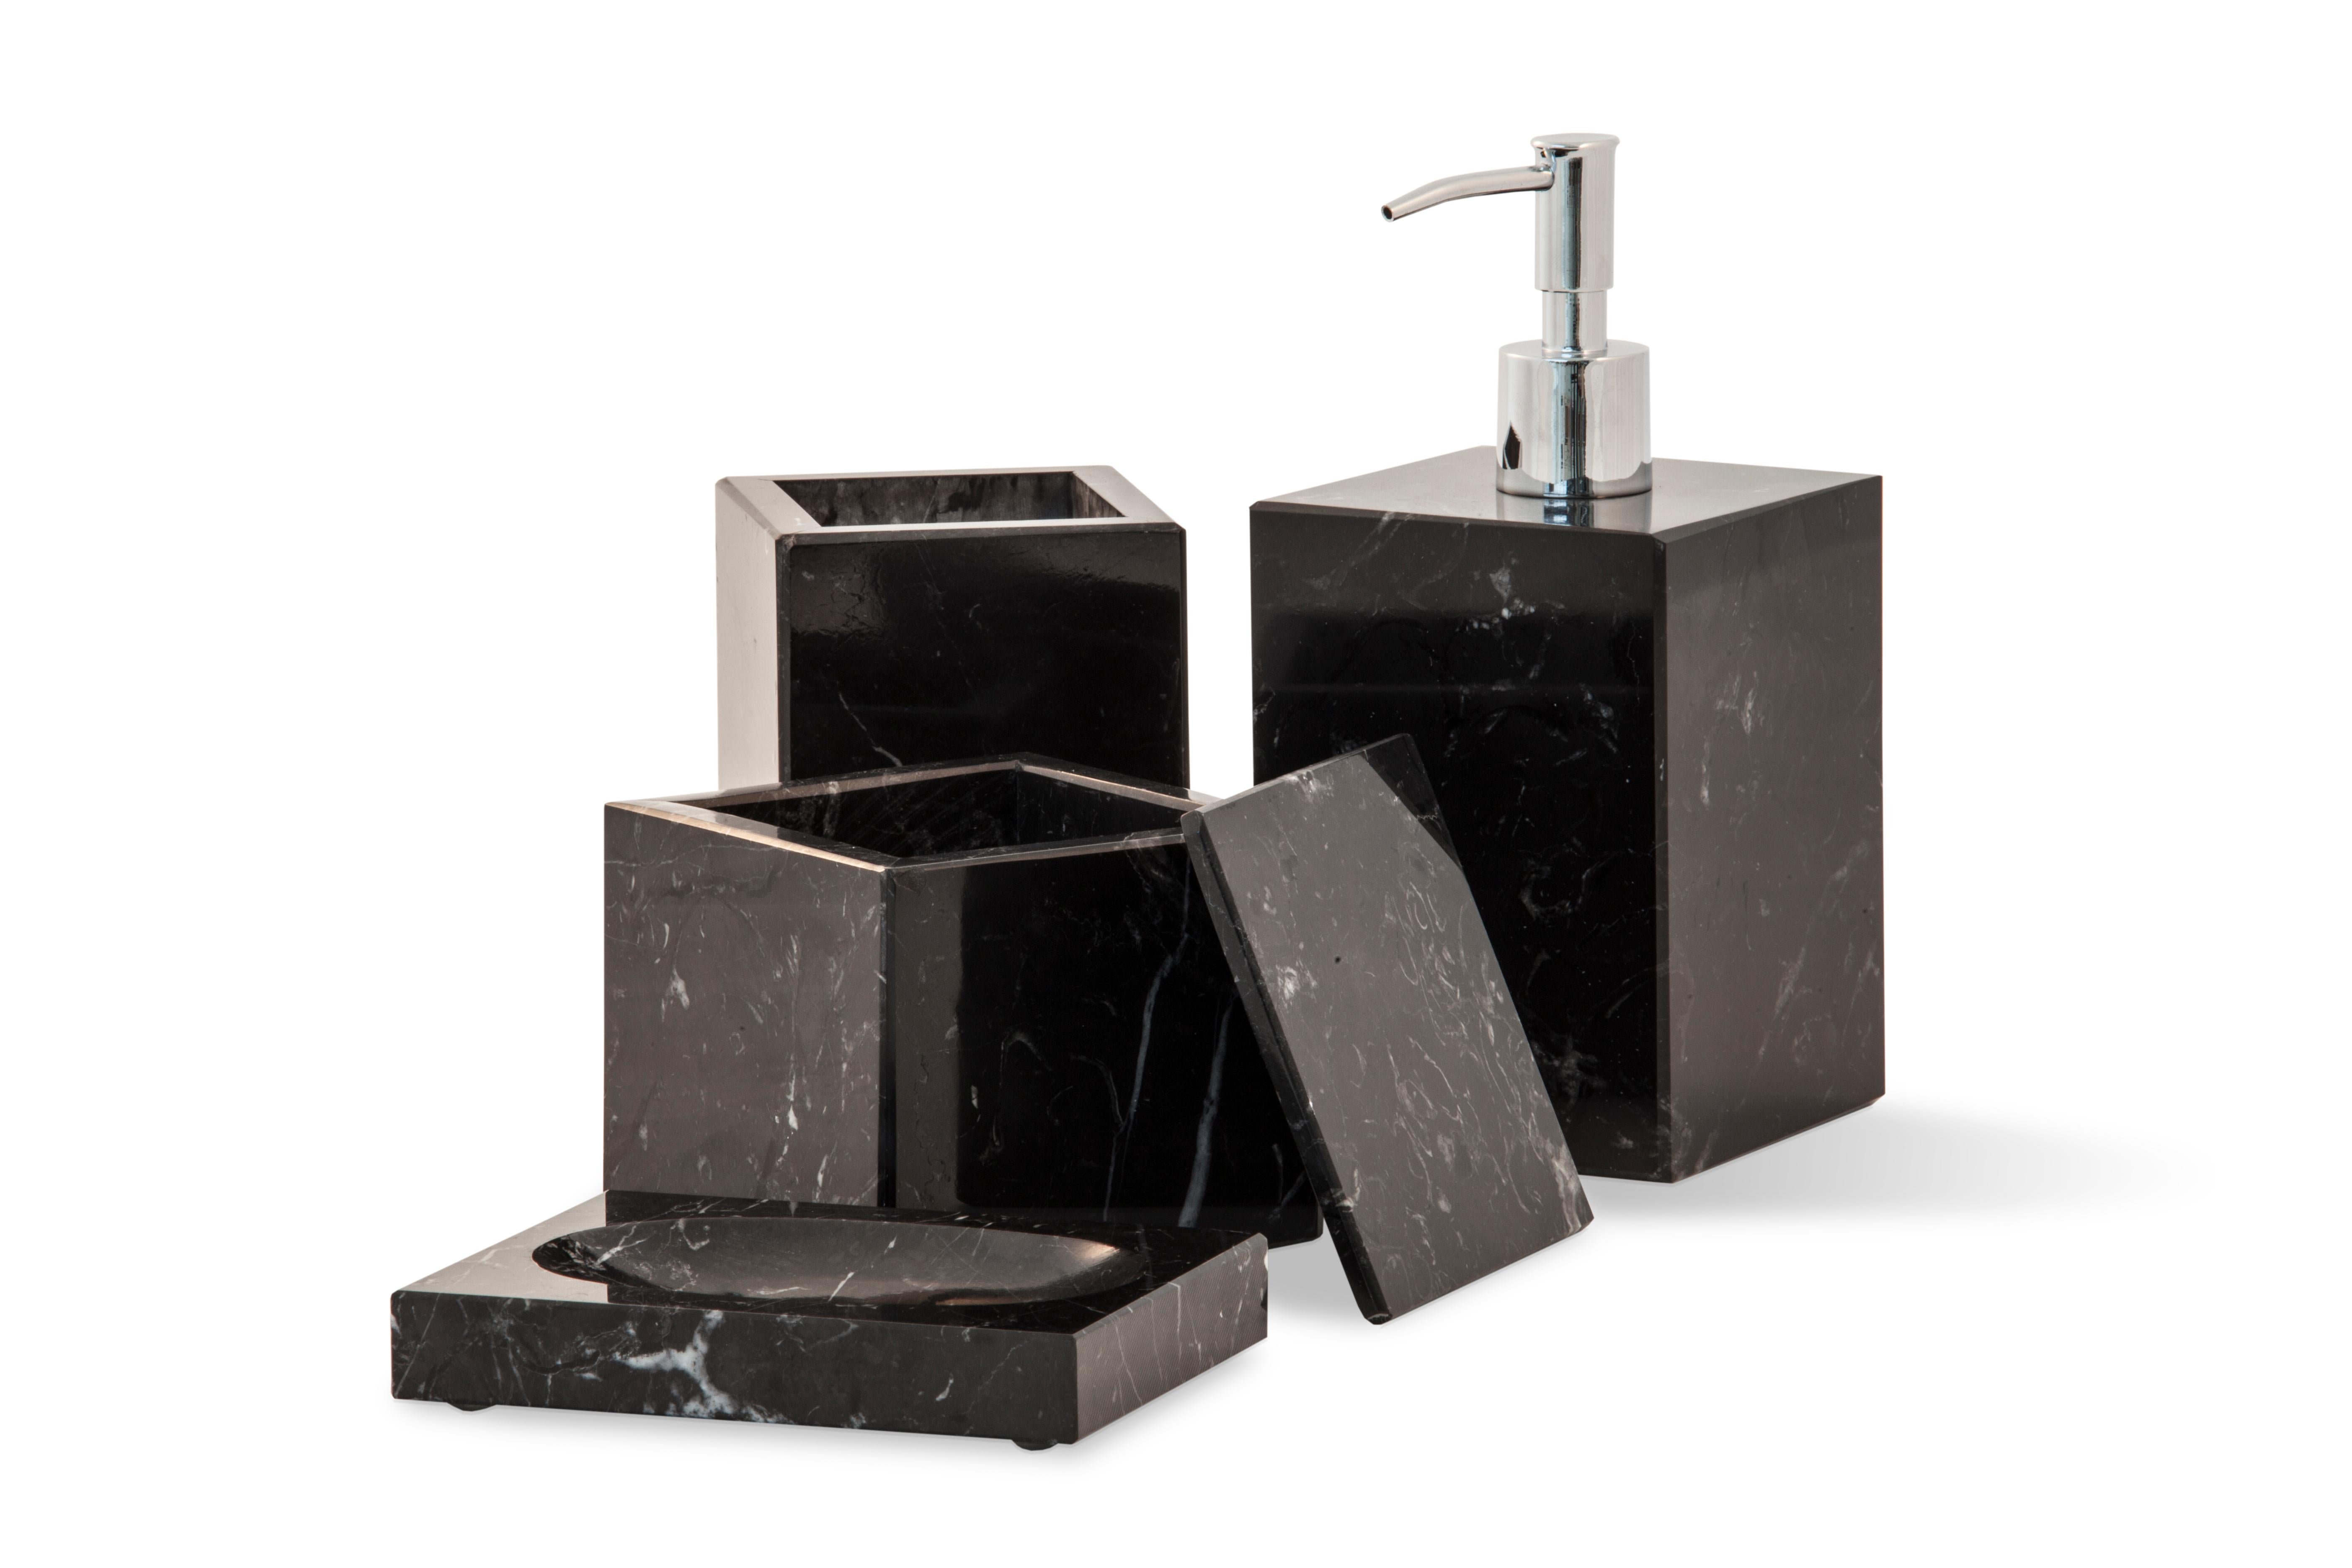 A squared shape toothbrush holder in black Marquina marble.
Each piece is in a way unique (since each marble block is different in veins and shades) and handcrafted in Italy. Slight variations in shape, color and size are to be considered a